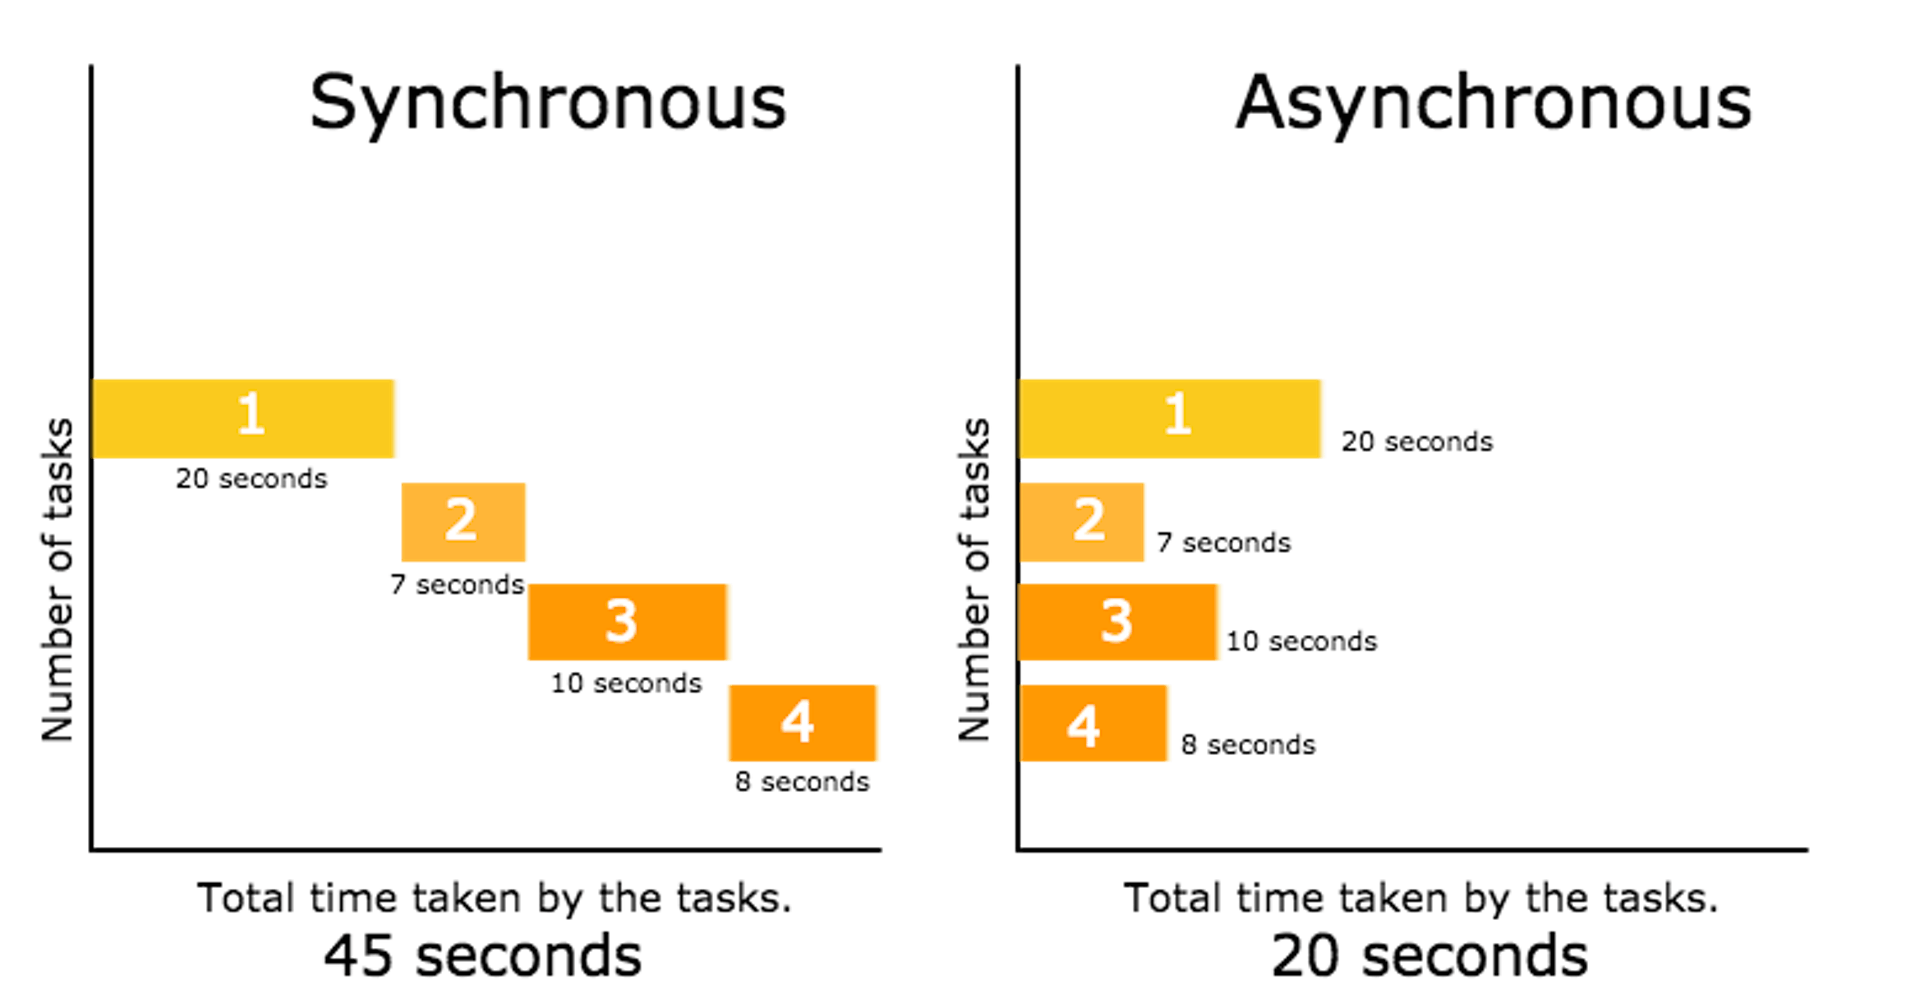 Source: http://www.phpmind.com/blog/2017/05/synchronous-and-asynchronous/